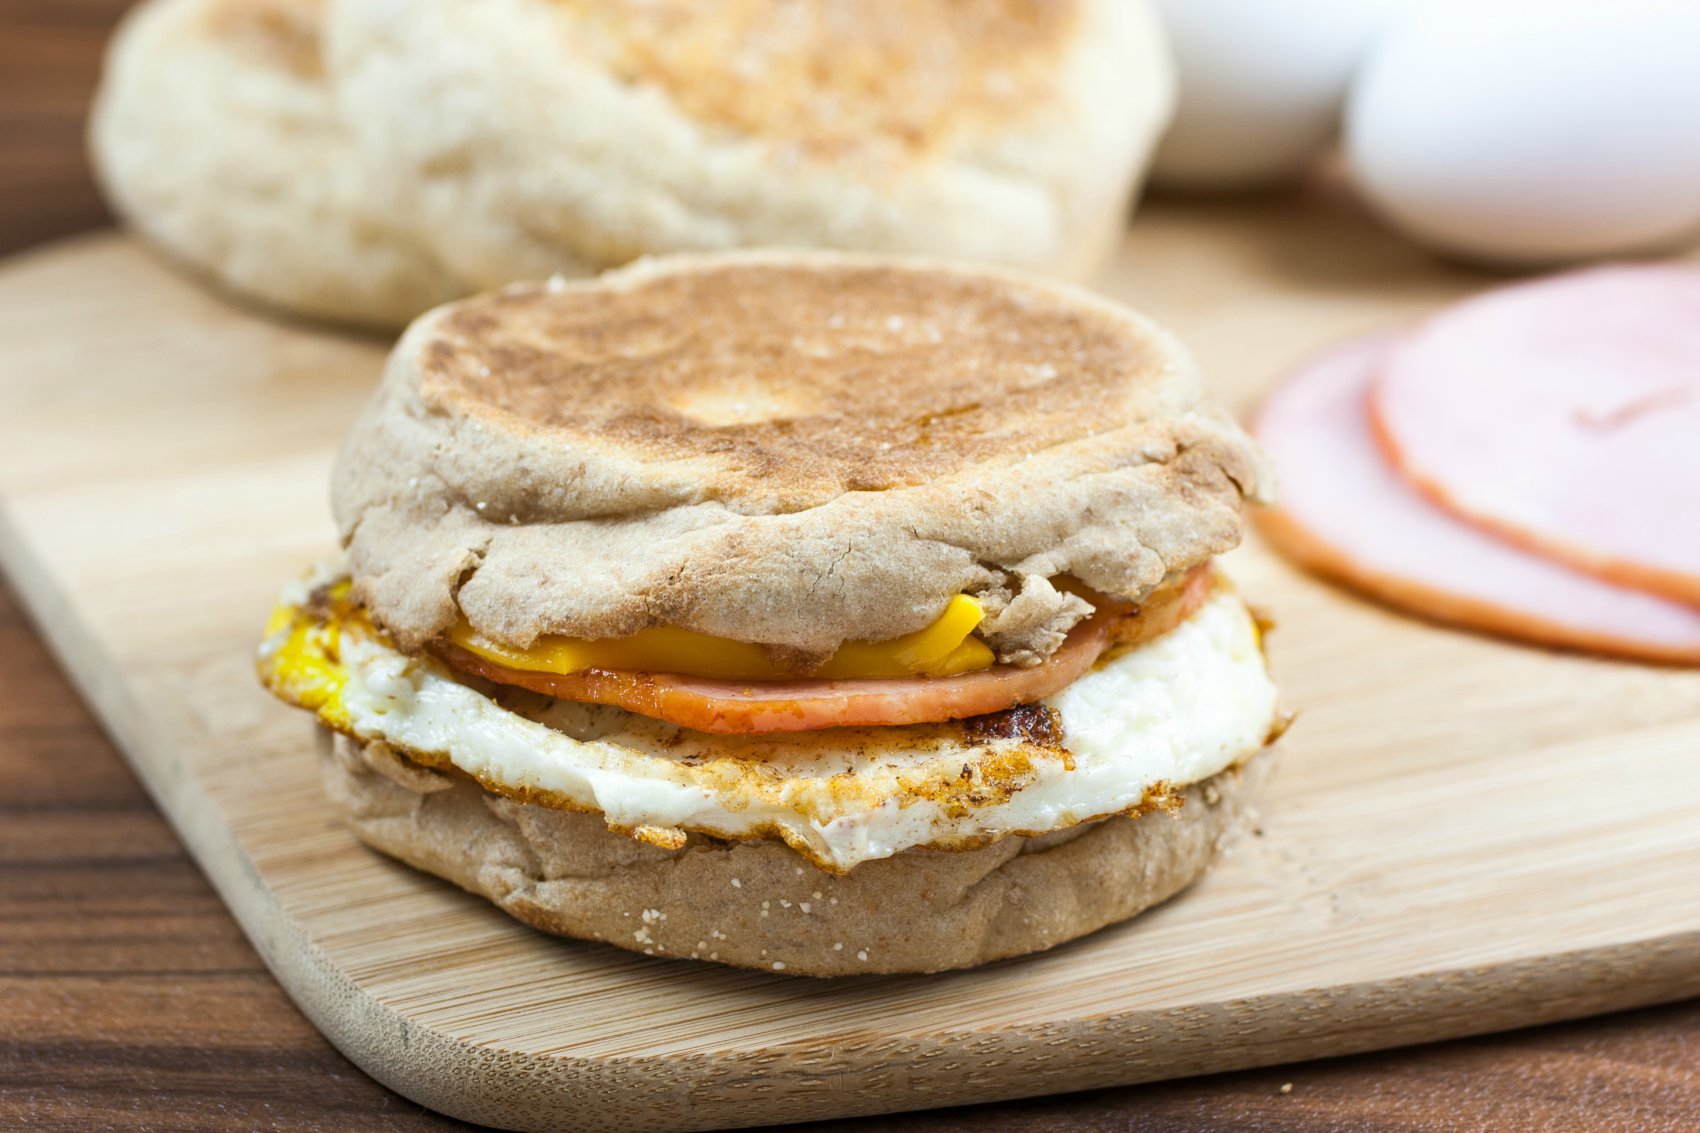 5 FAST Breakfast Meals For When You’re on the Go